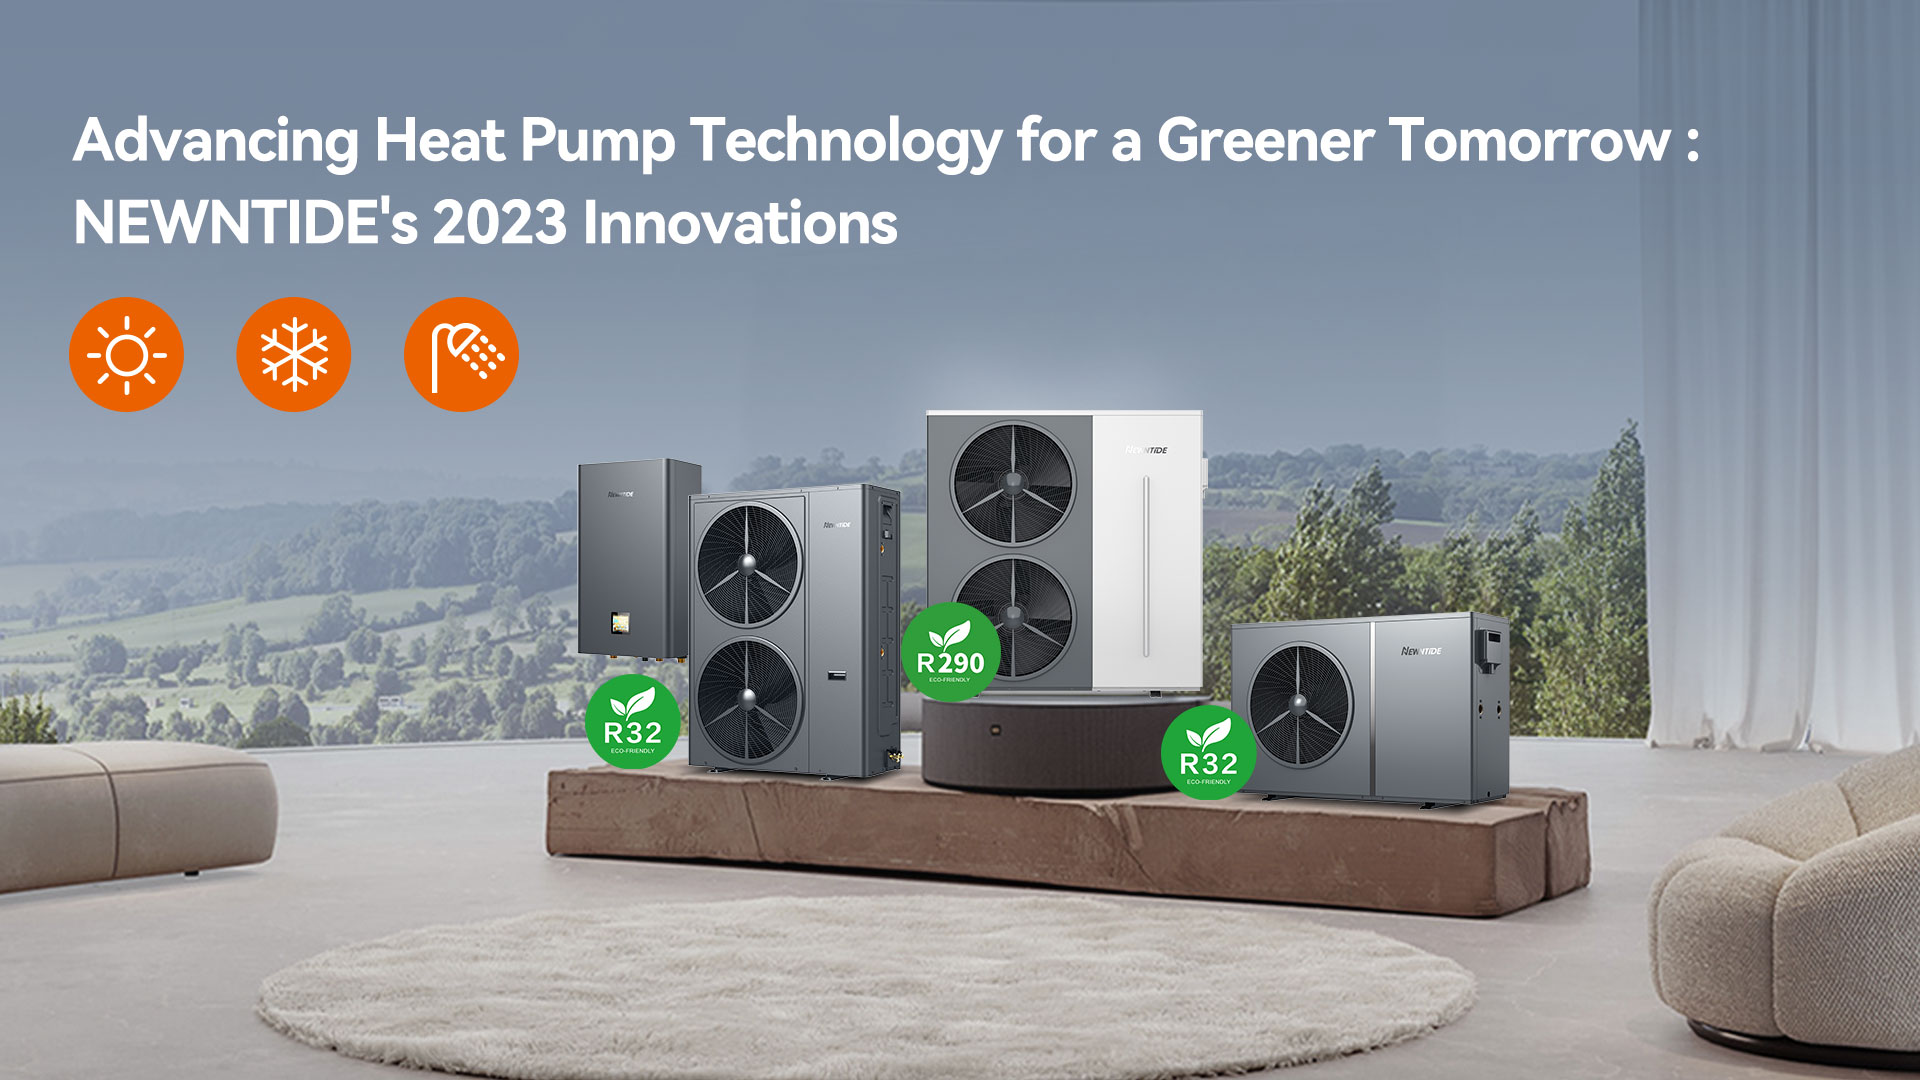 Advancing Heat Pump Technology for a Greener Tomorrow: NEWNTIDE's 2023 Innovations